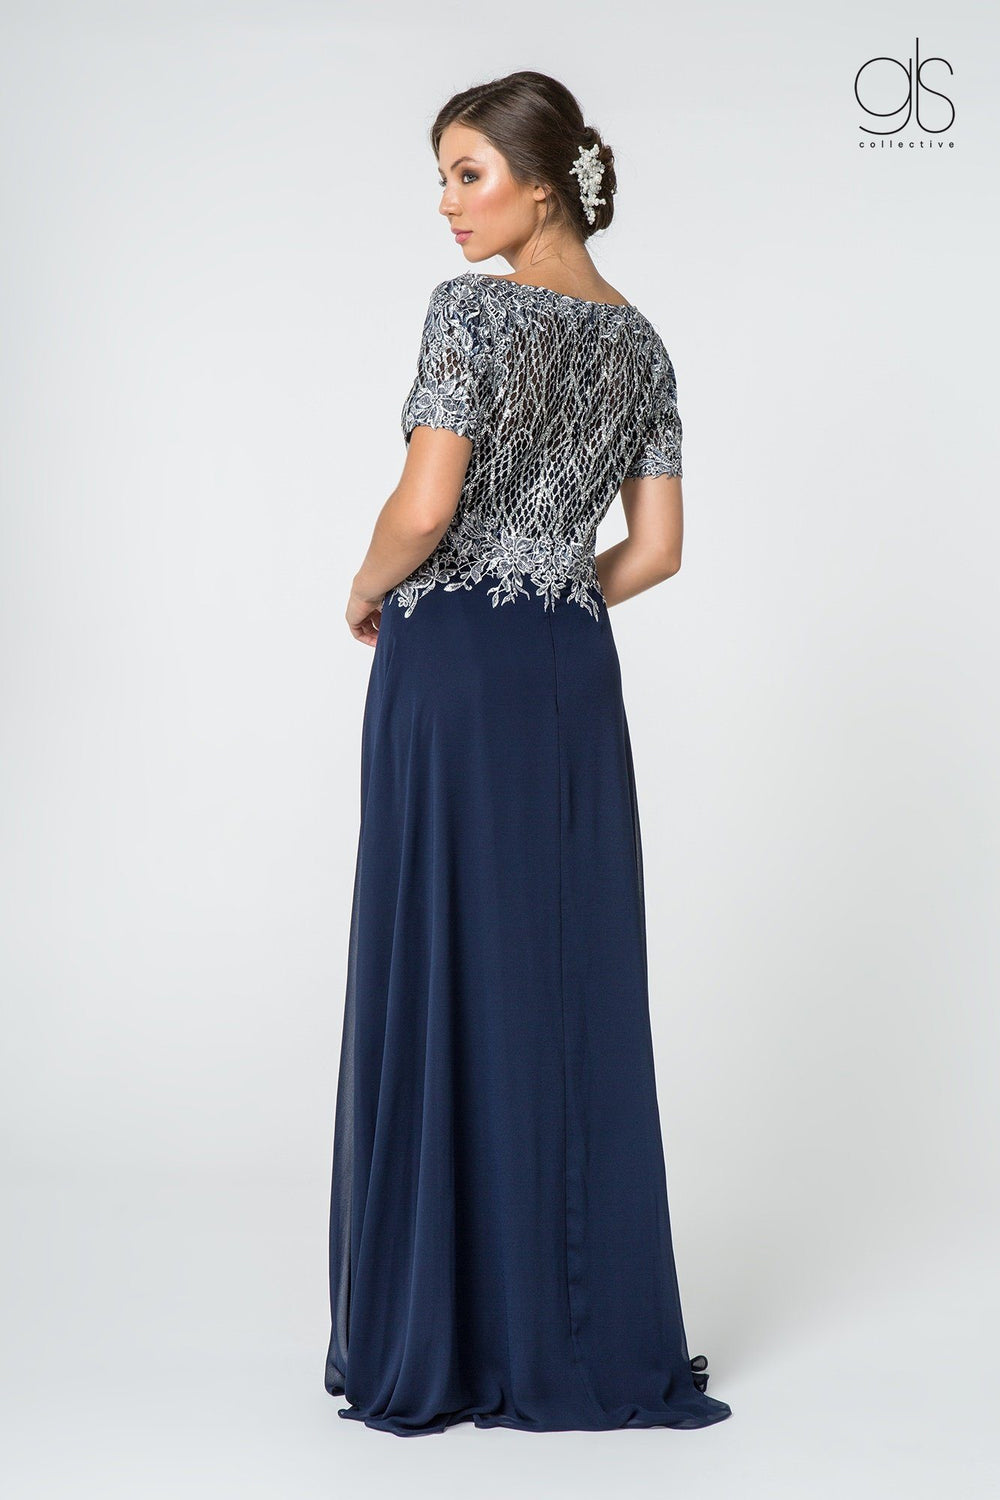 Short-Sleeve Gown with Glitter Lace Bodice by Elizabeth K GL2826-Long Formal Dresses-ABC Fashion